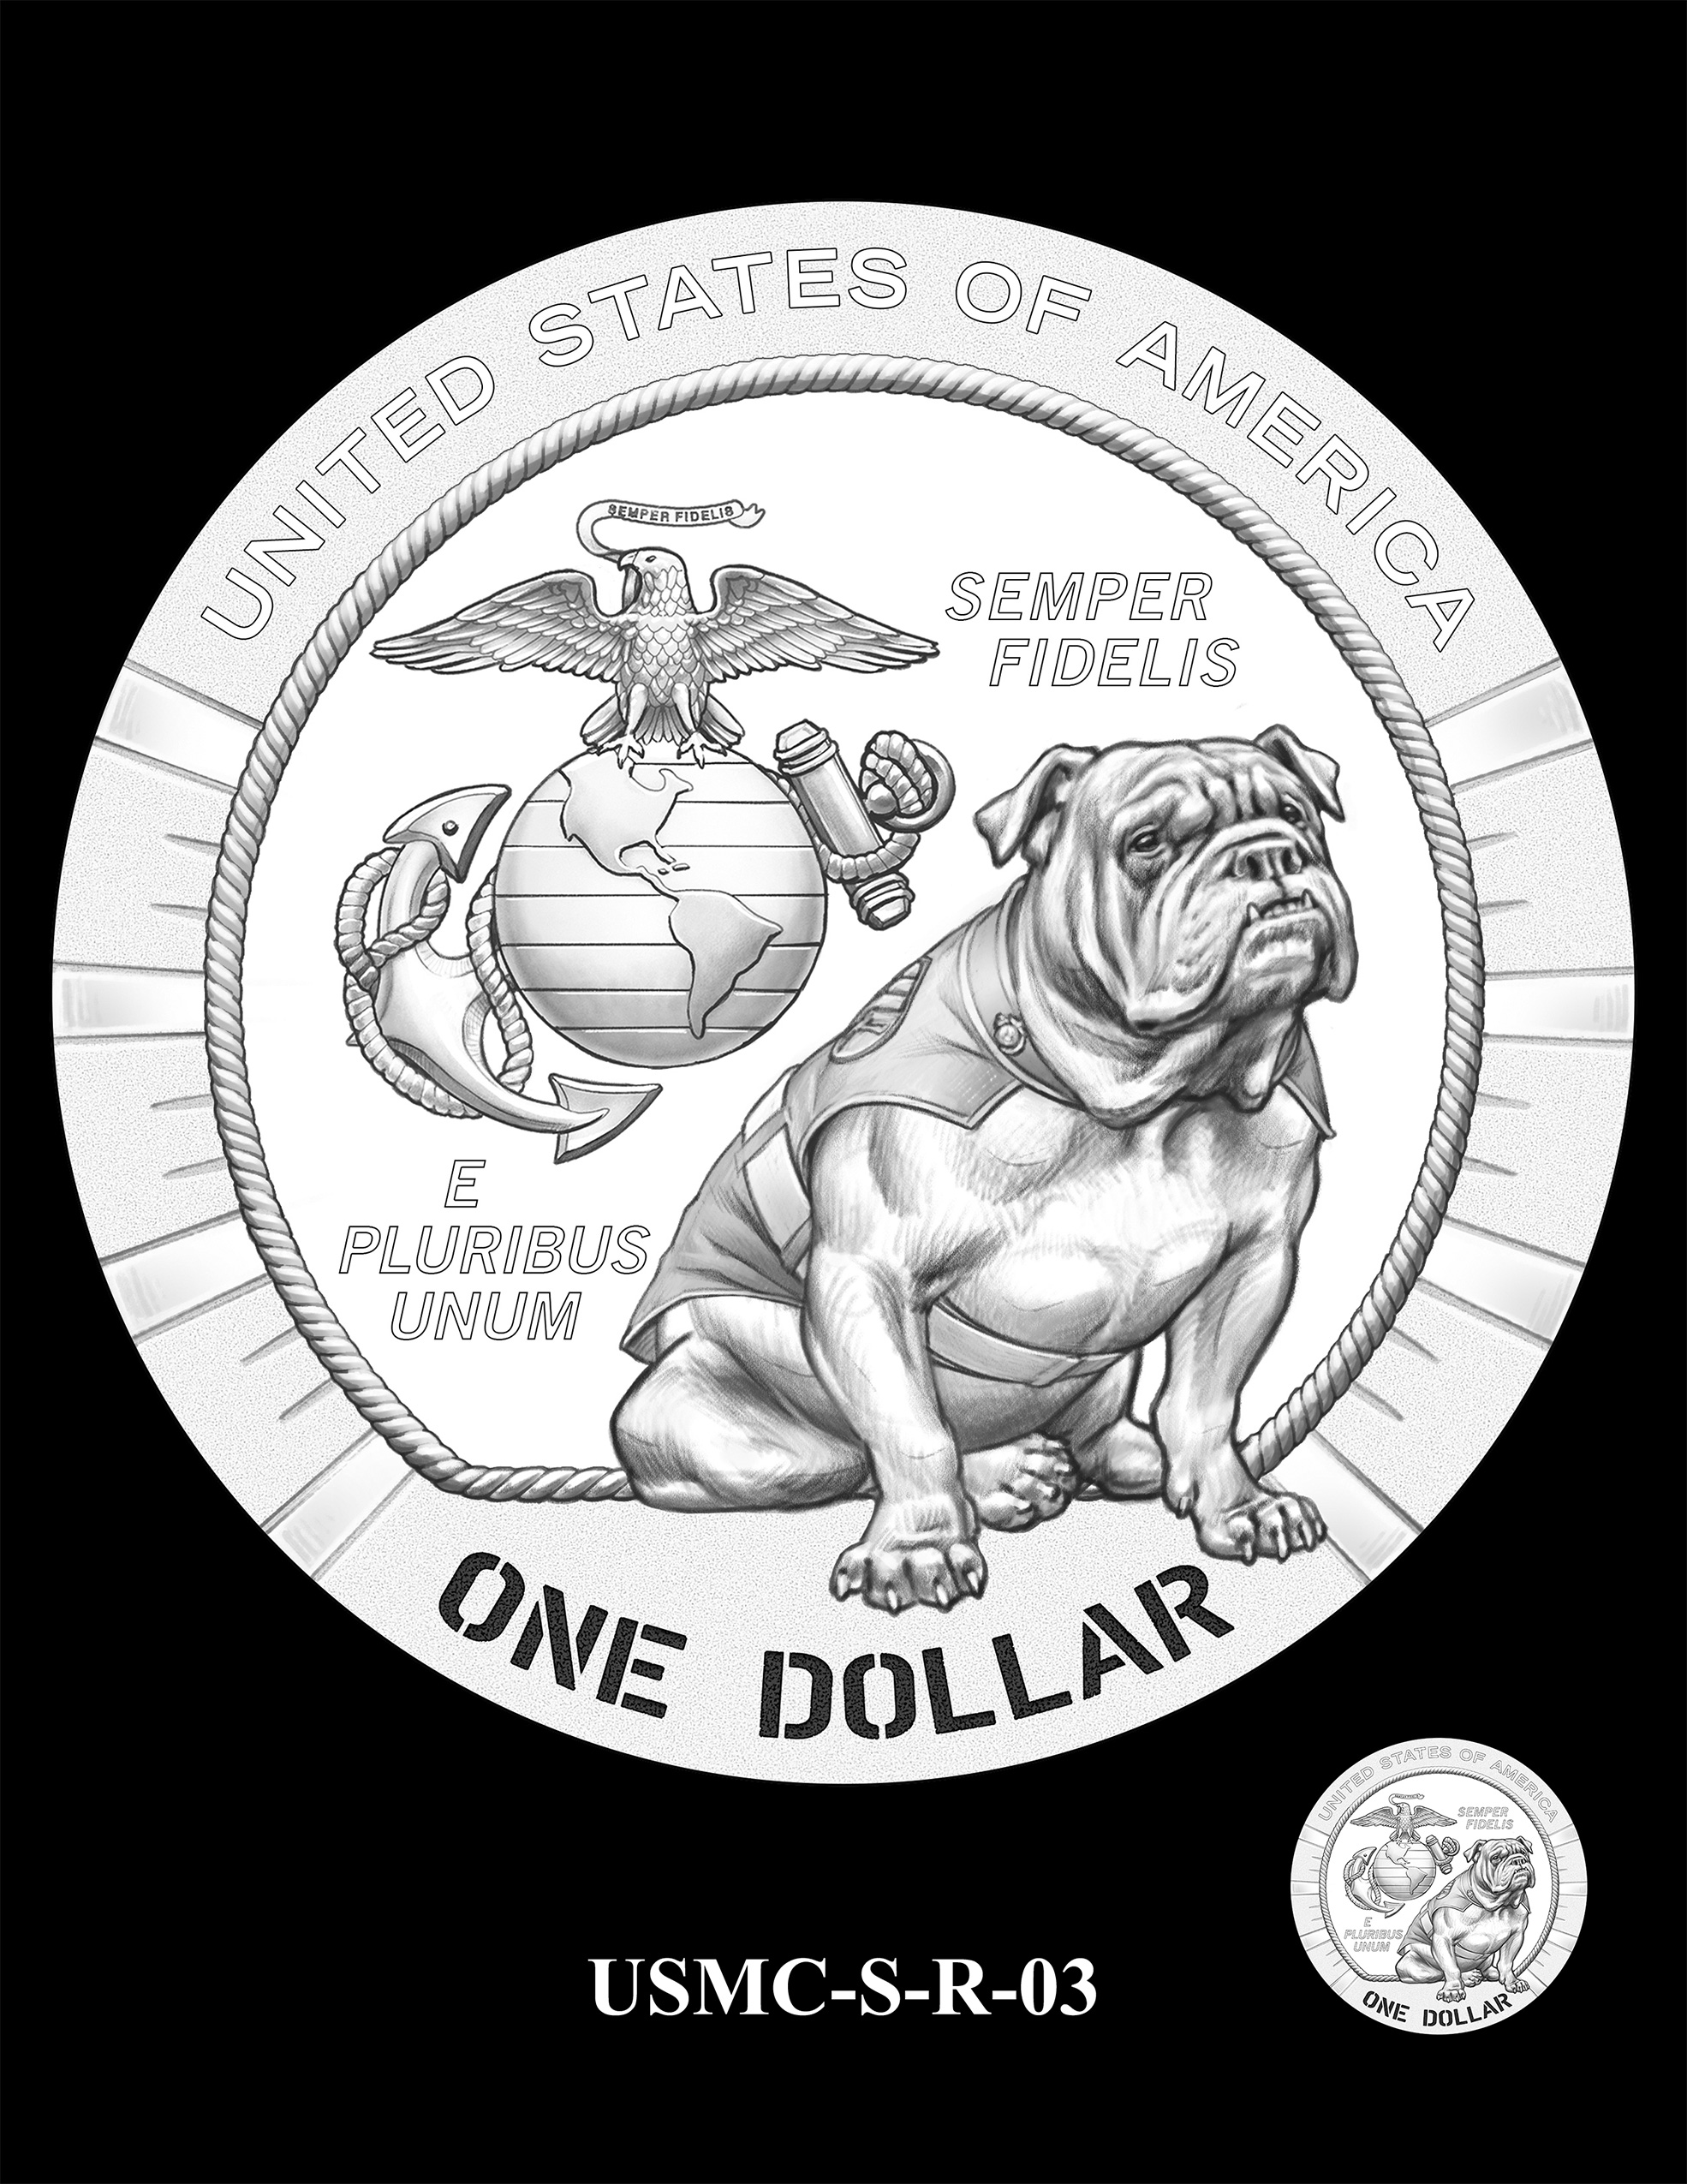 USMC-S-R-03 -- 250th Anniversary of the United States Marine Corps - Silver